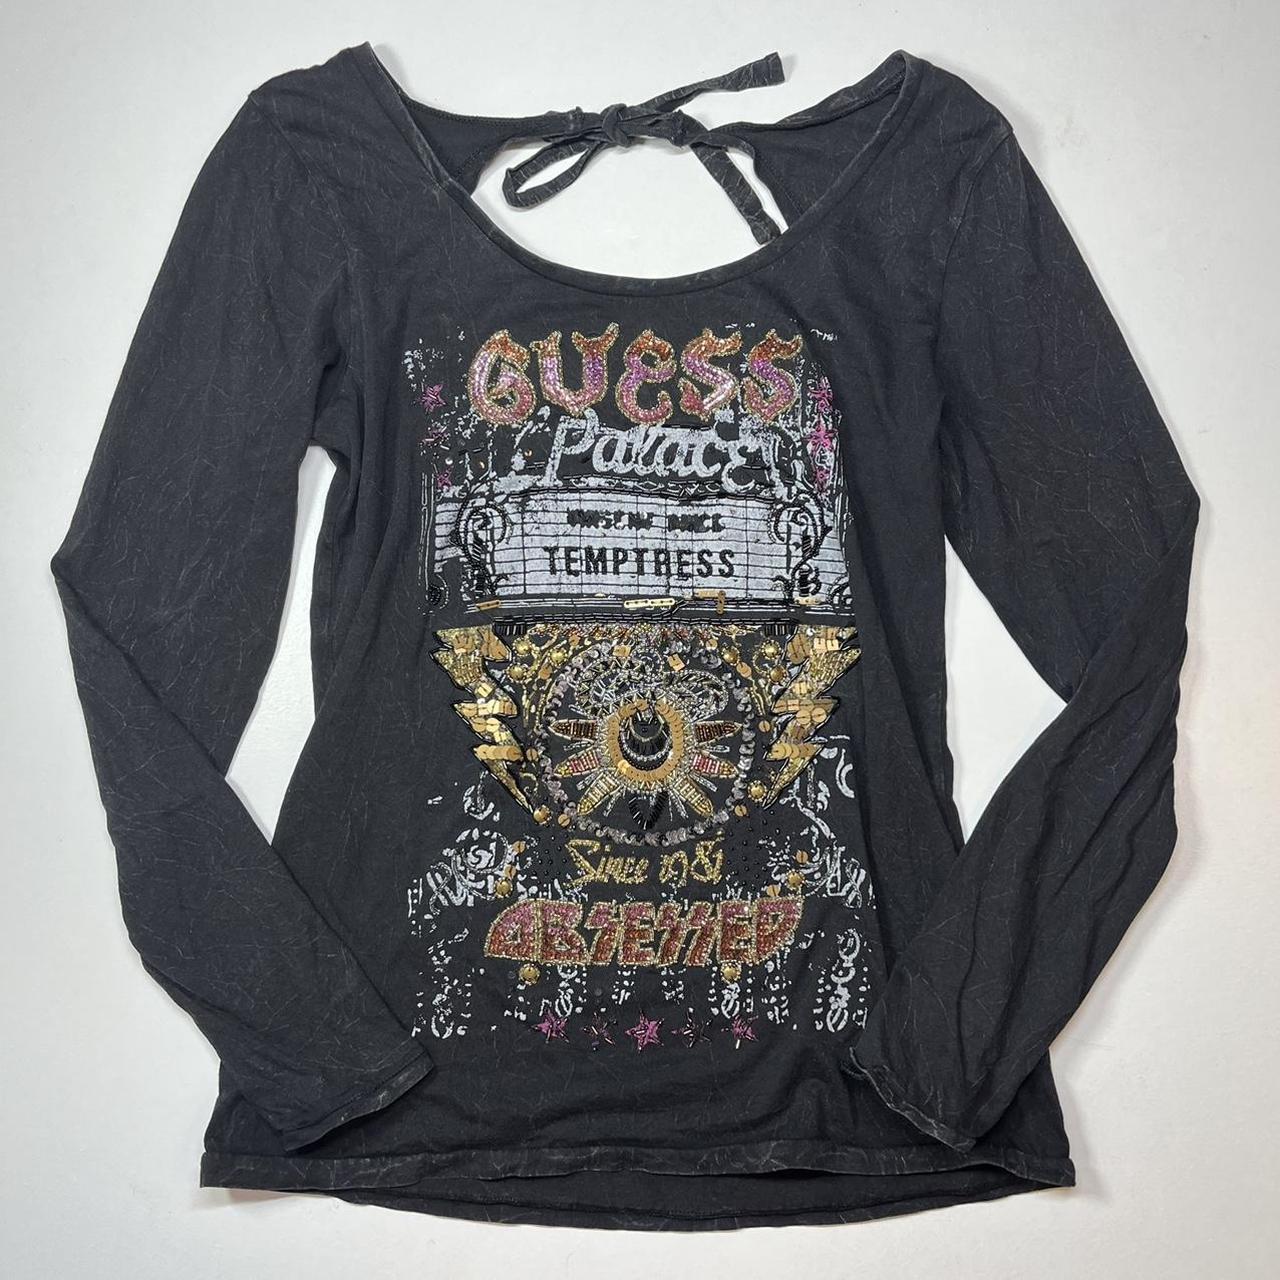 Guess Women's Black and Grey T-shirt (2)